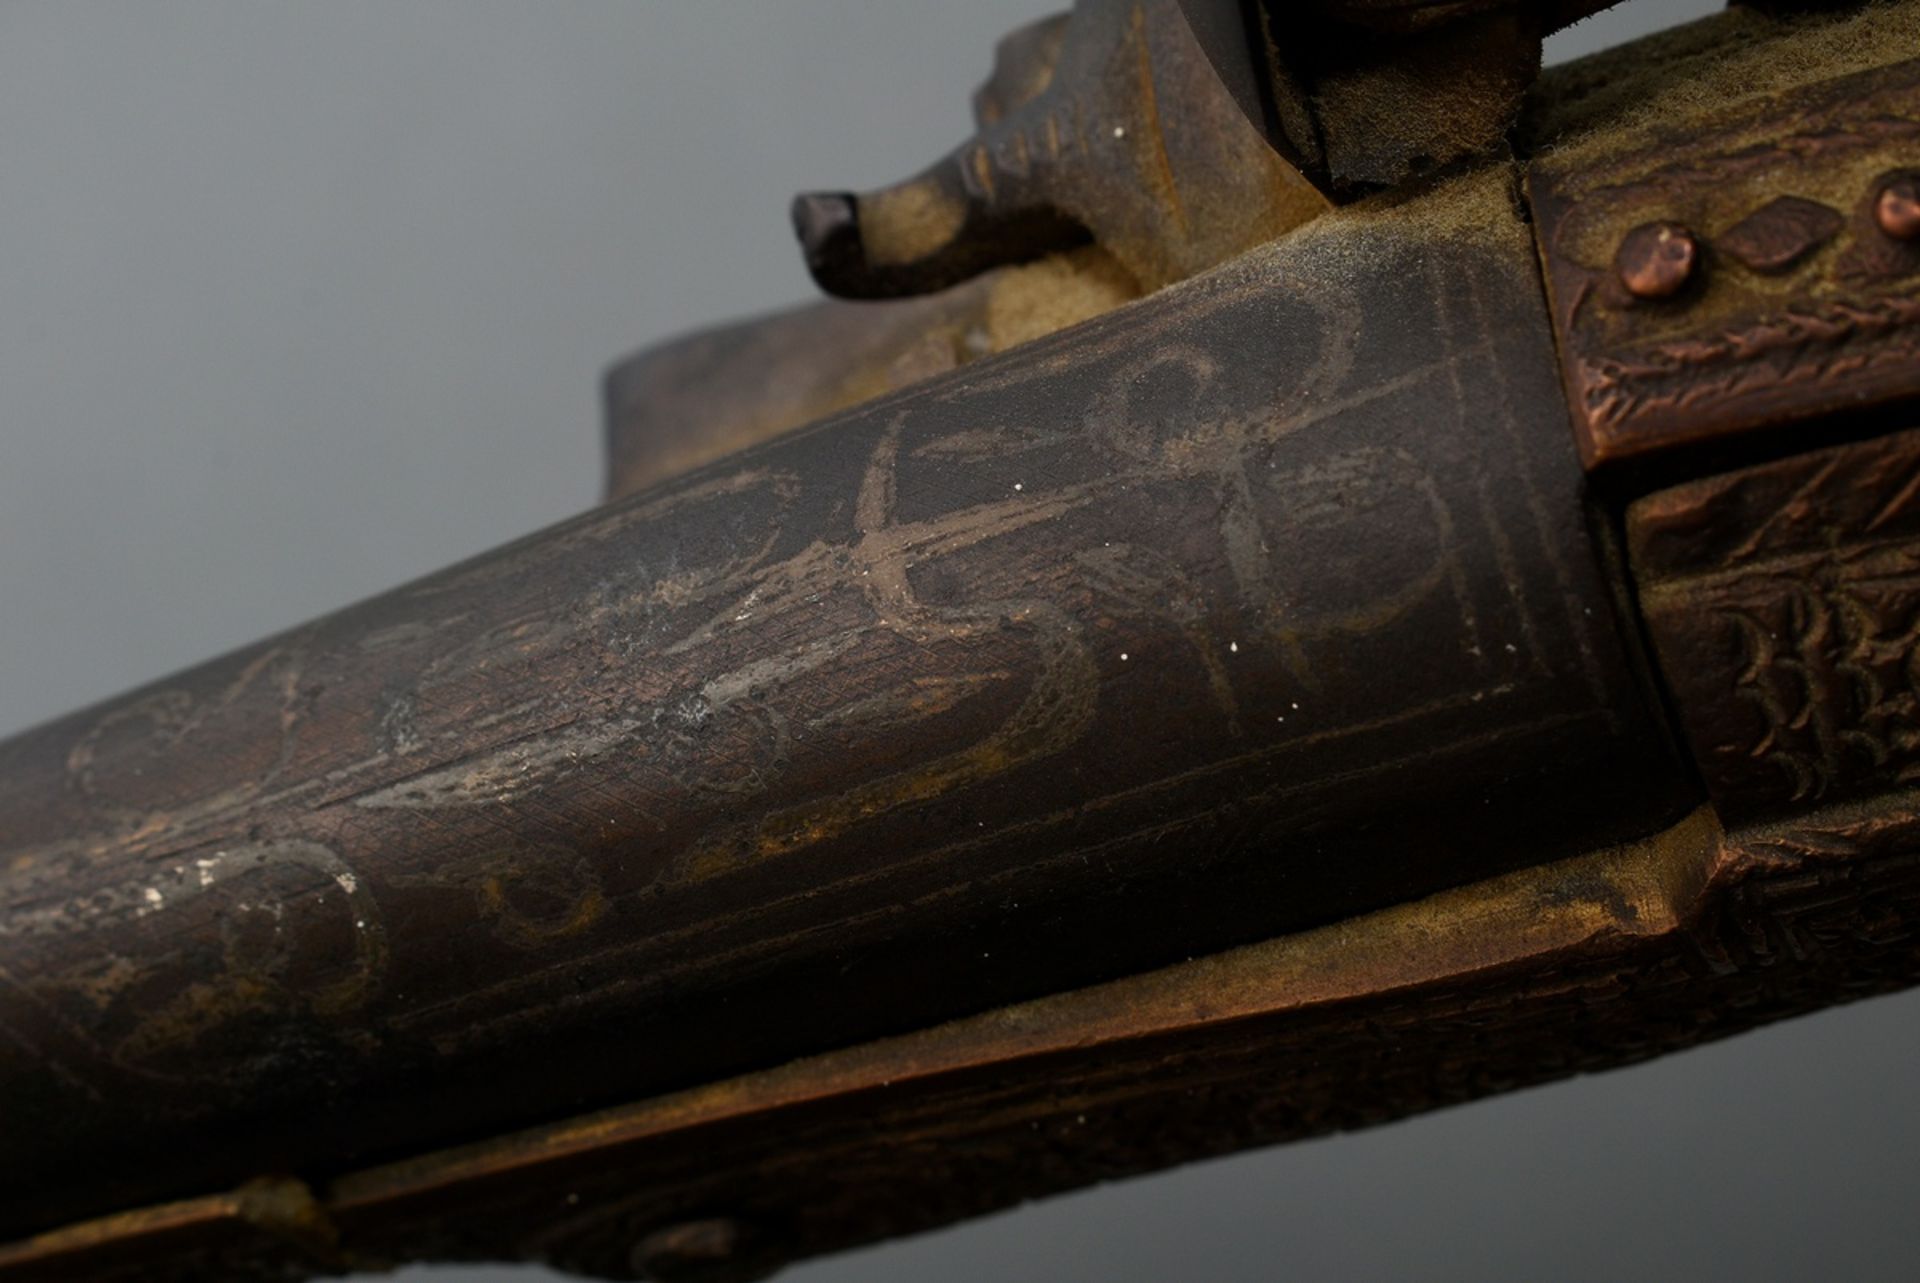 2 Ottoman muzzle loading flintlock pistols, smooth bore with engraved brass overlay, calibre 14mm,  - Image 6 of 8